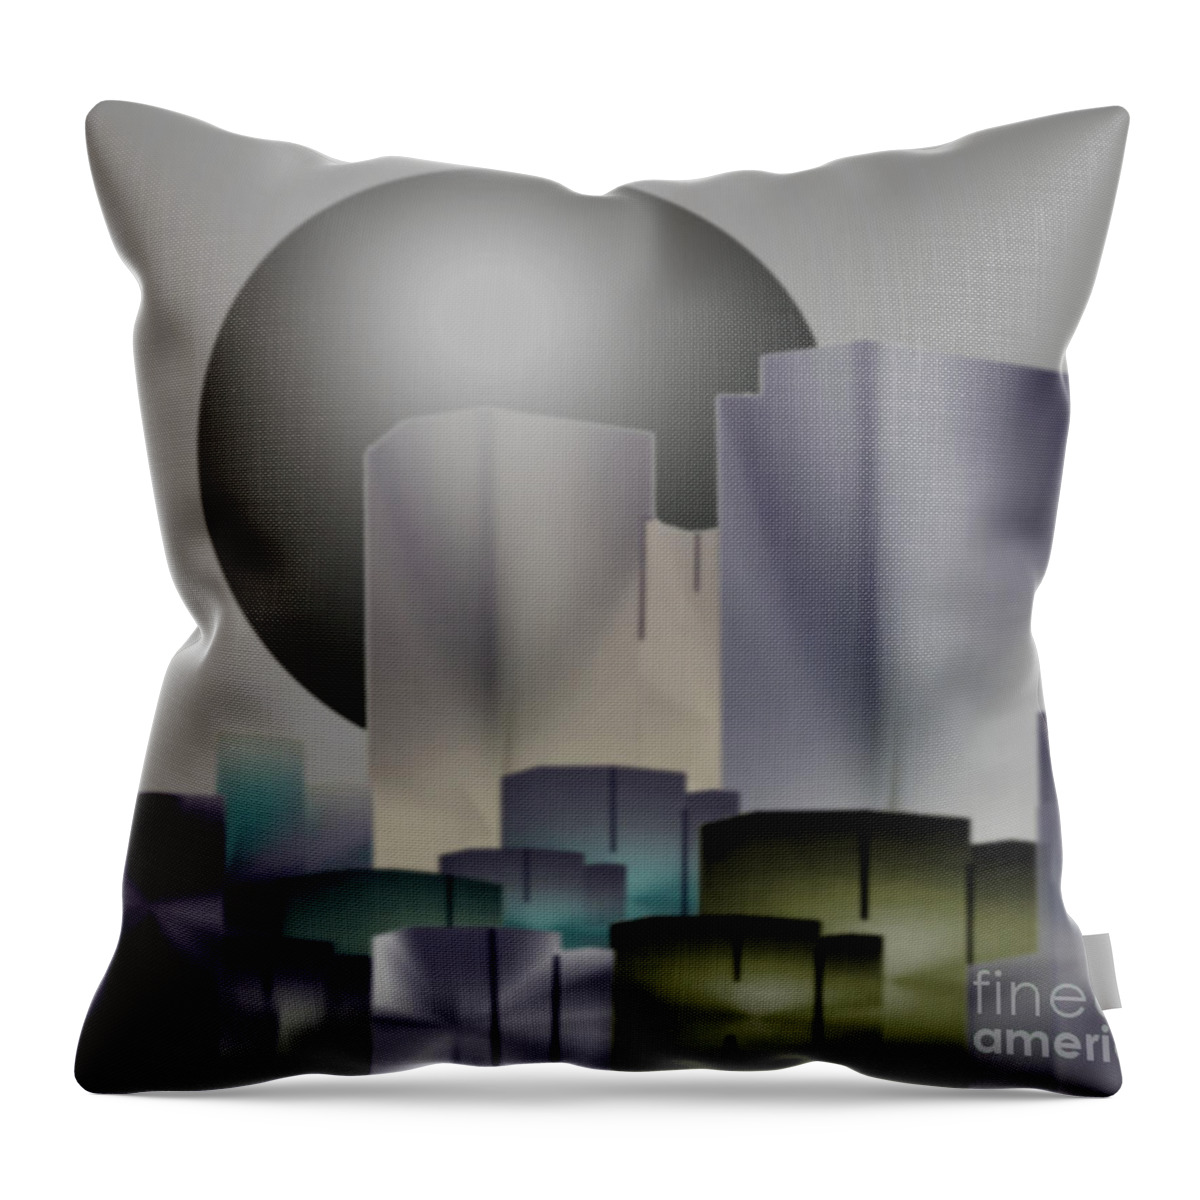 Abstract Cityscapes Throw Pillow featuring the digital art Dark Moon Over The City by John Krakora